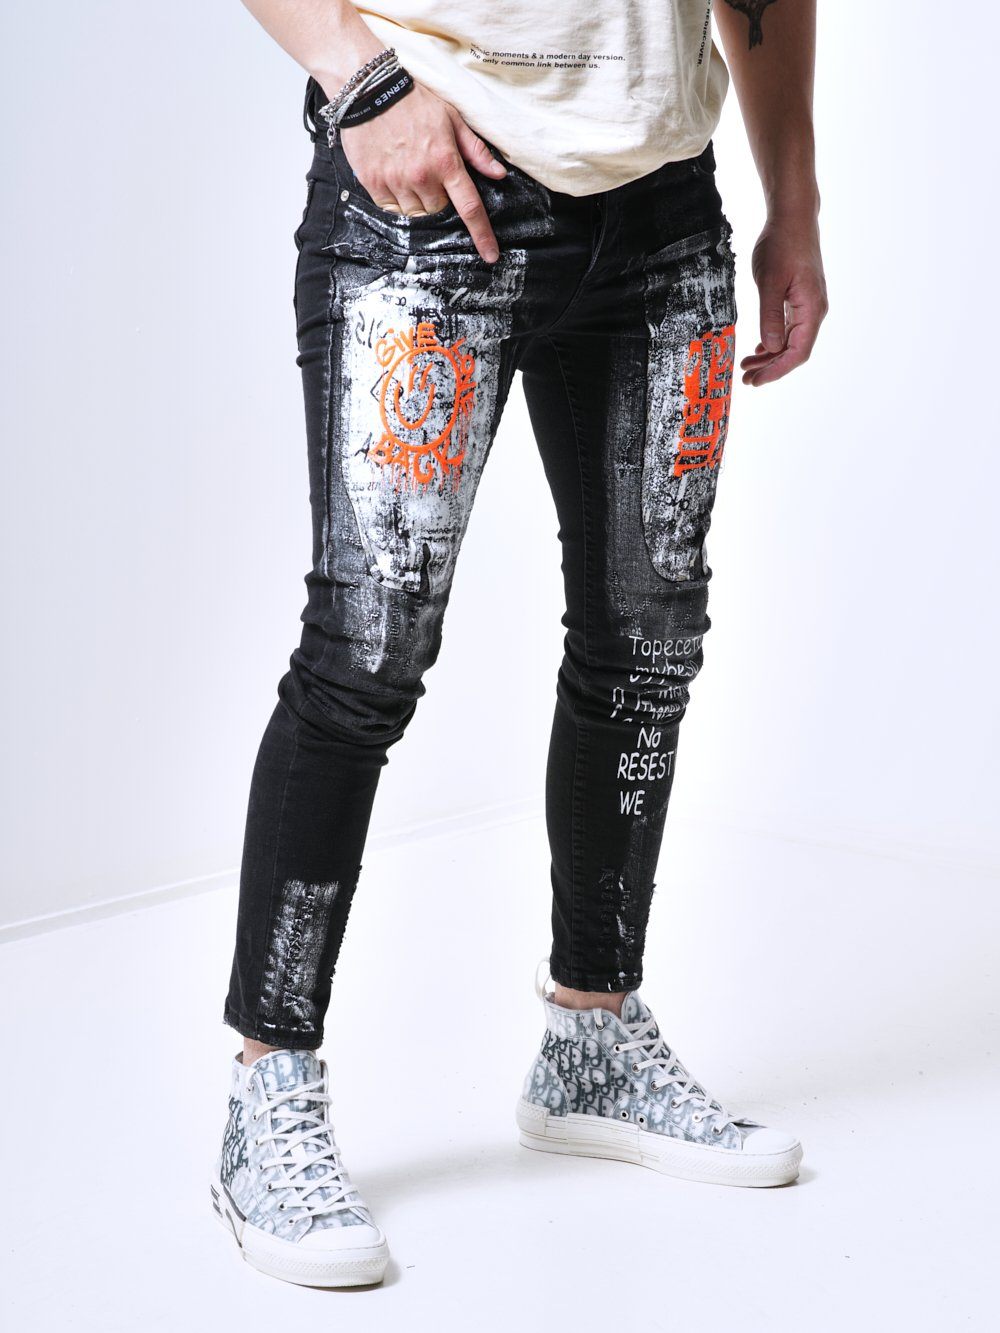 A man wearing a pair of SIXTY SIX jeans with graffiti on them.